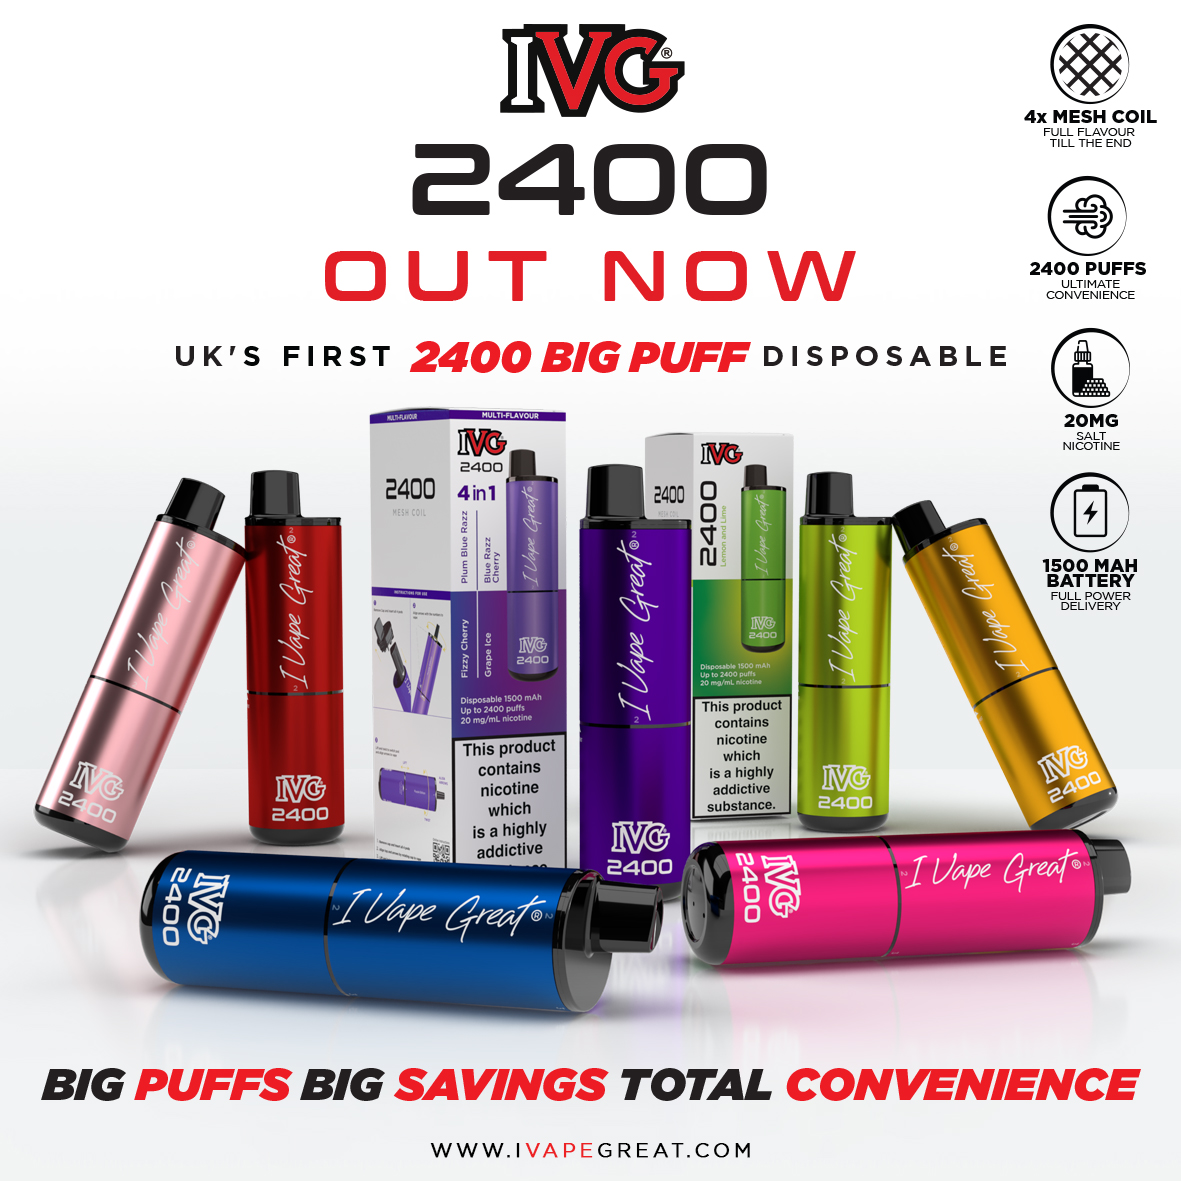 📣 Out Now 📣
#IVG2400 is the UK's first legal big puff disposable. 
Big Puffs, Big Savings, Total Convenience.

✅ 2400 Puffs
✅ 20mg Salt Nicotine
✅ 26 Single Flavours
✅ 4 Multi-flavour Combinations
✅ 4x Mesh Coil
✅ 1500 mAh Battery

#ivapegreat #newproduct #outnow